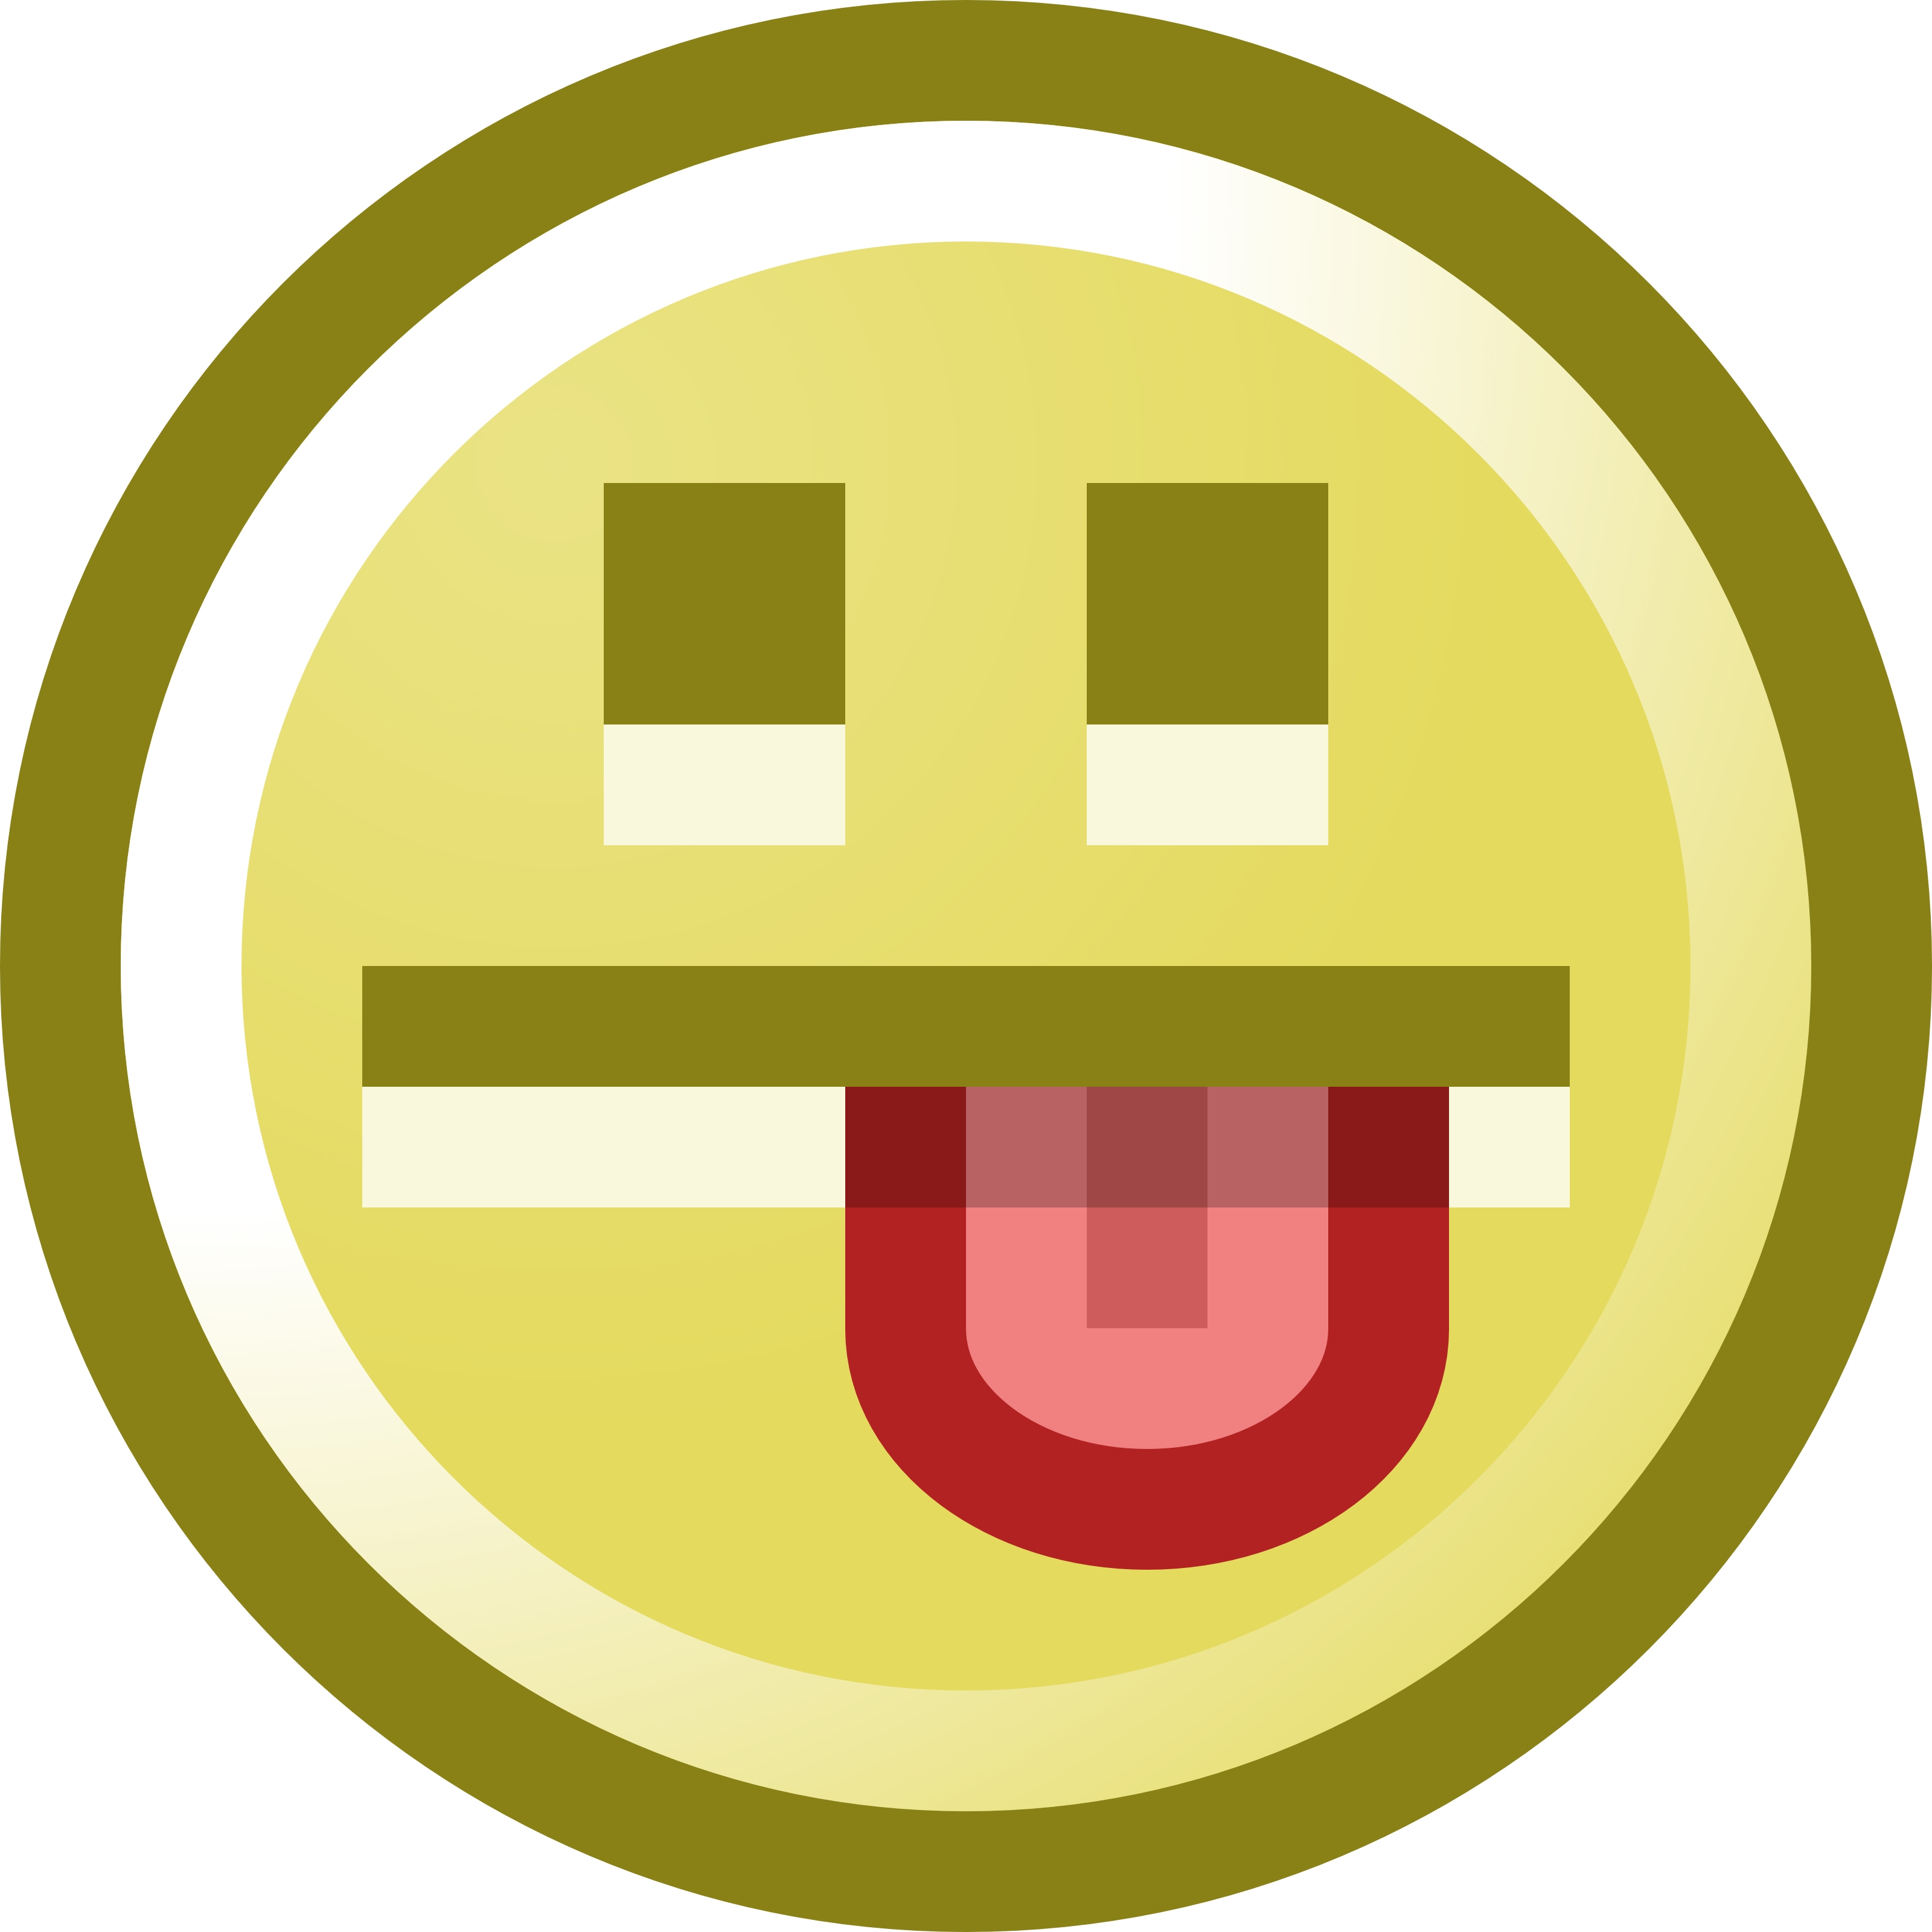 Smiley Face Sticking Tongue Out Clipart.